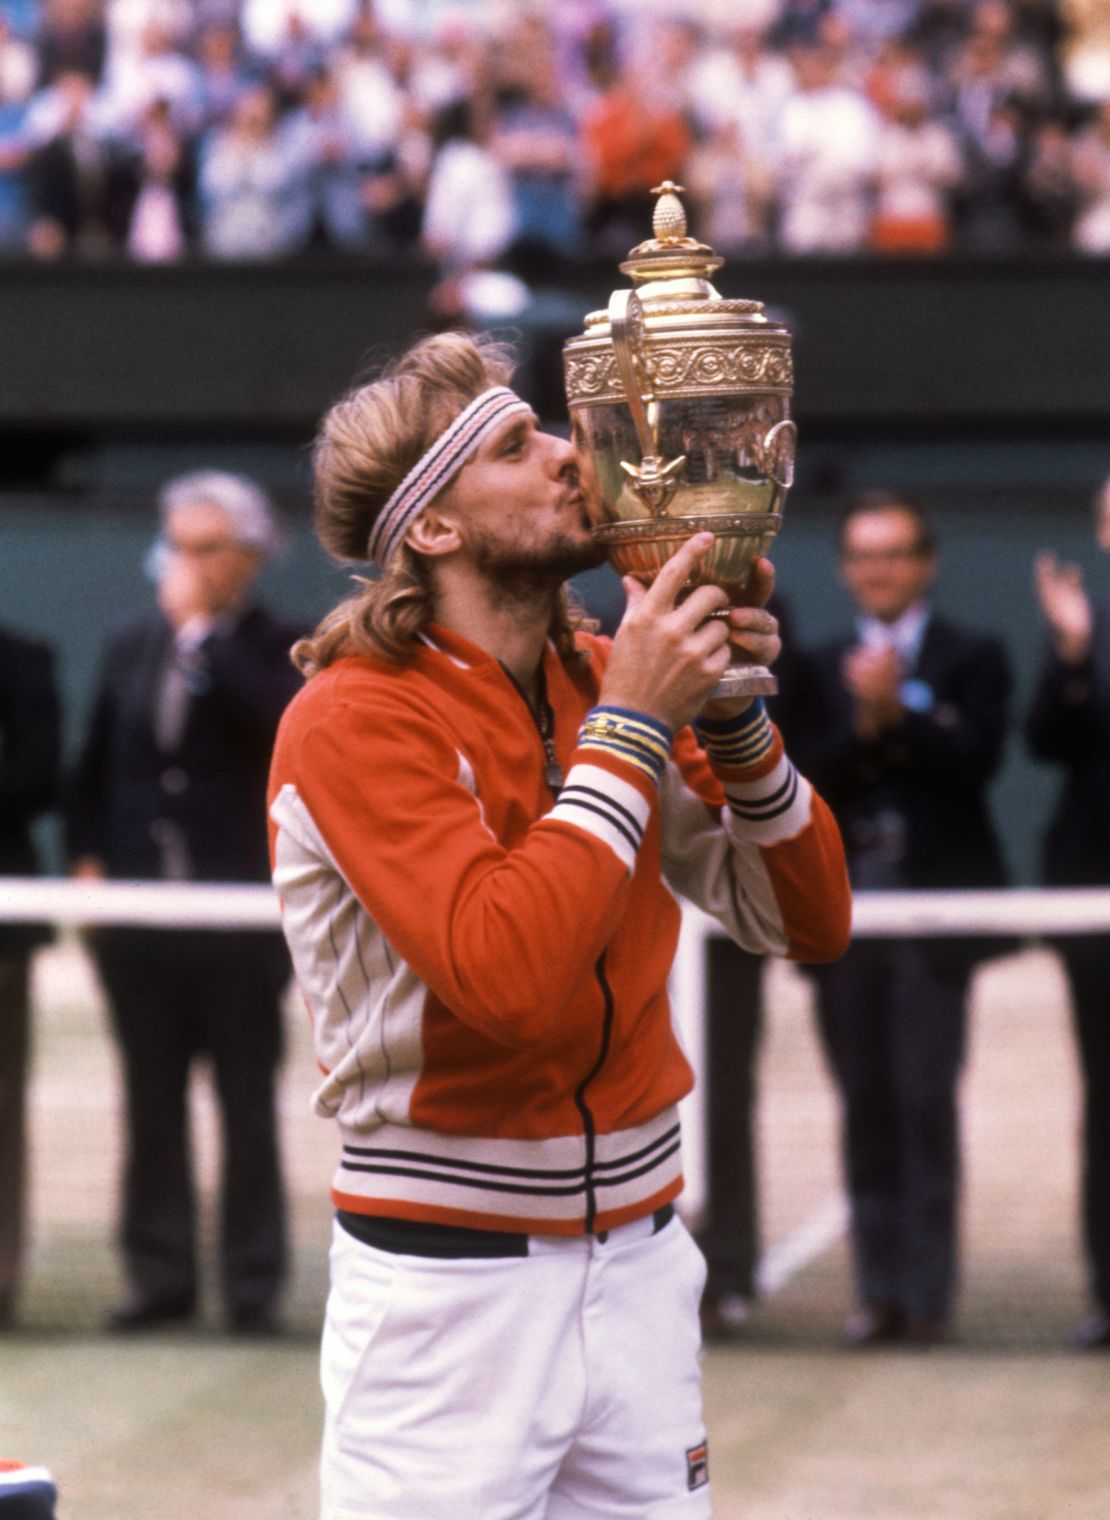 Björn Borg Pictures and Photos - Getty Images